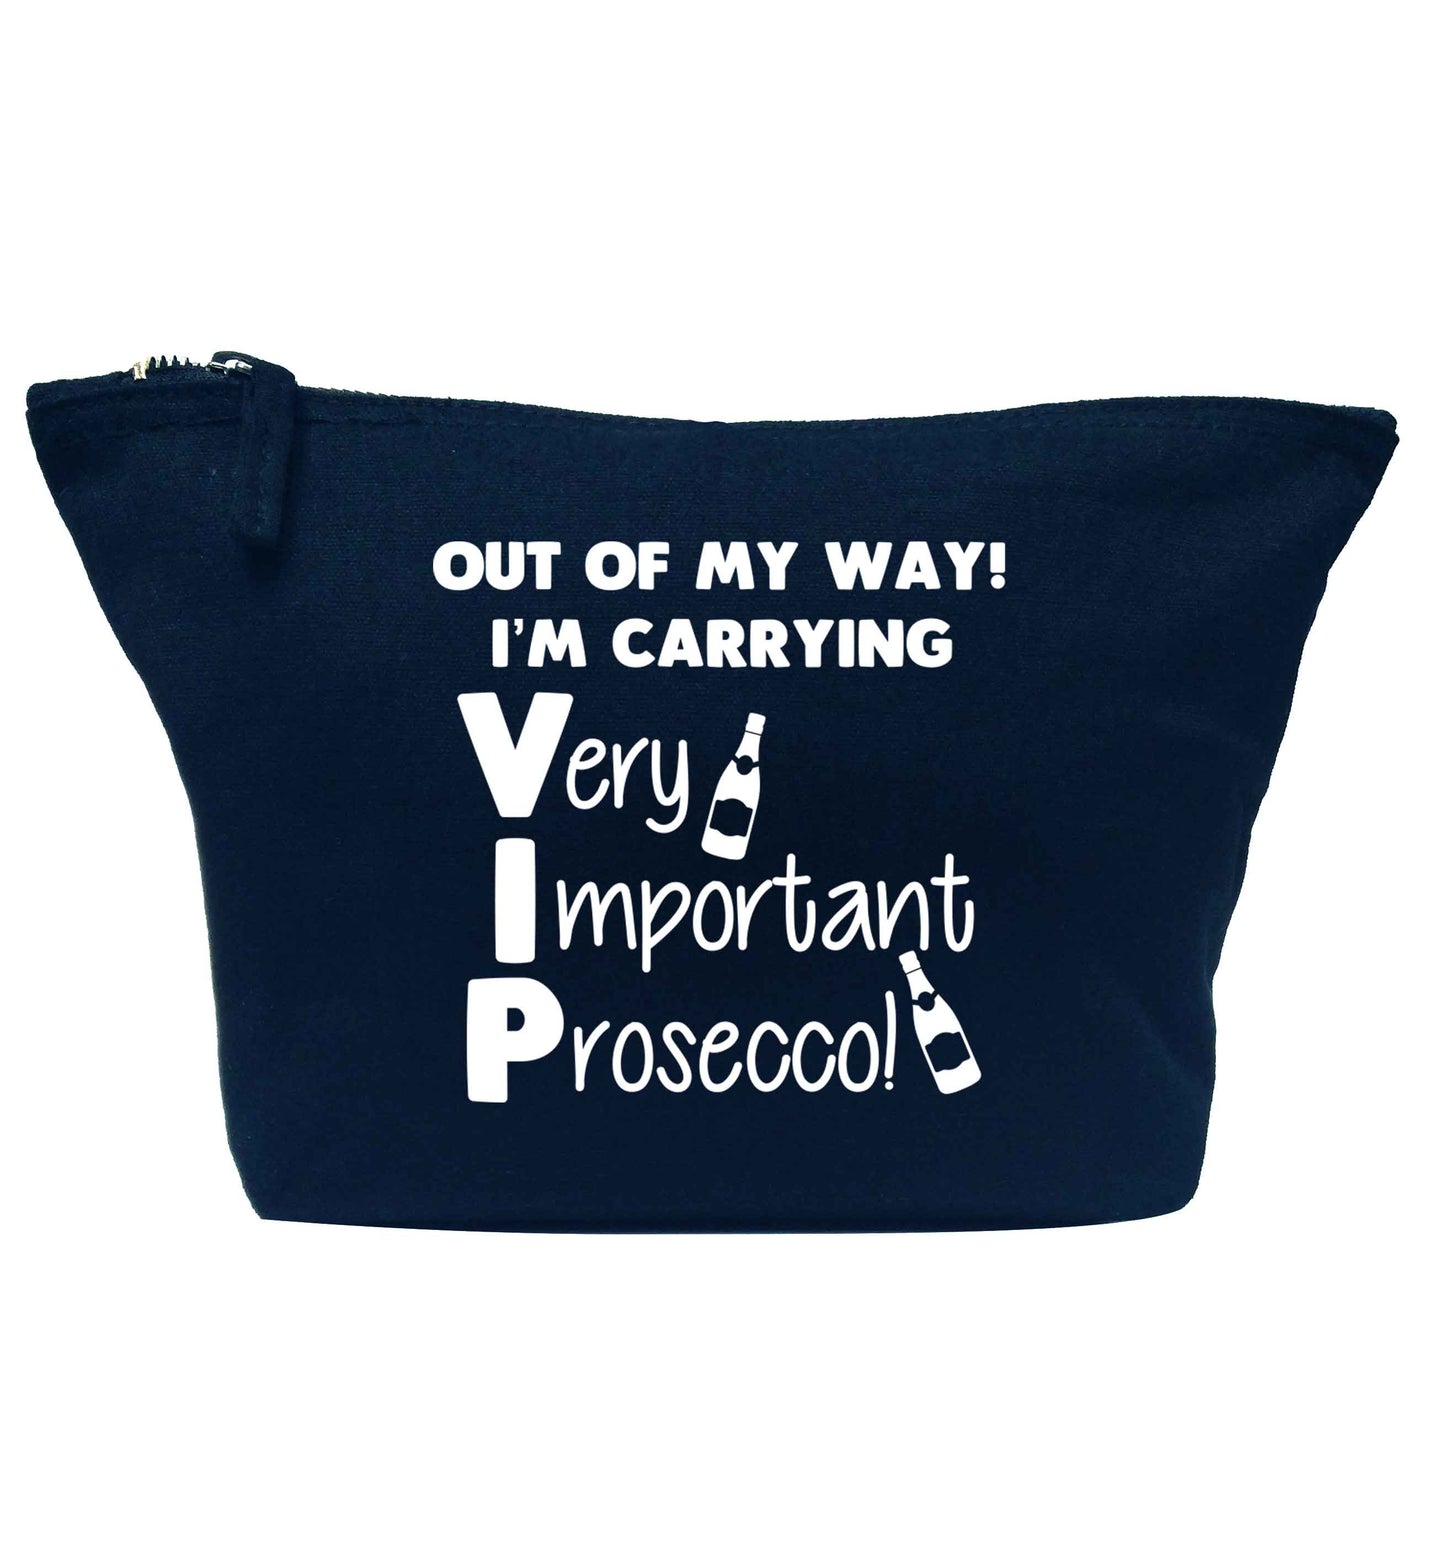 Out of my way I'm carrying very important prosecco! navy makeup bag